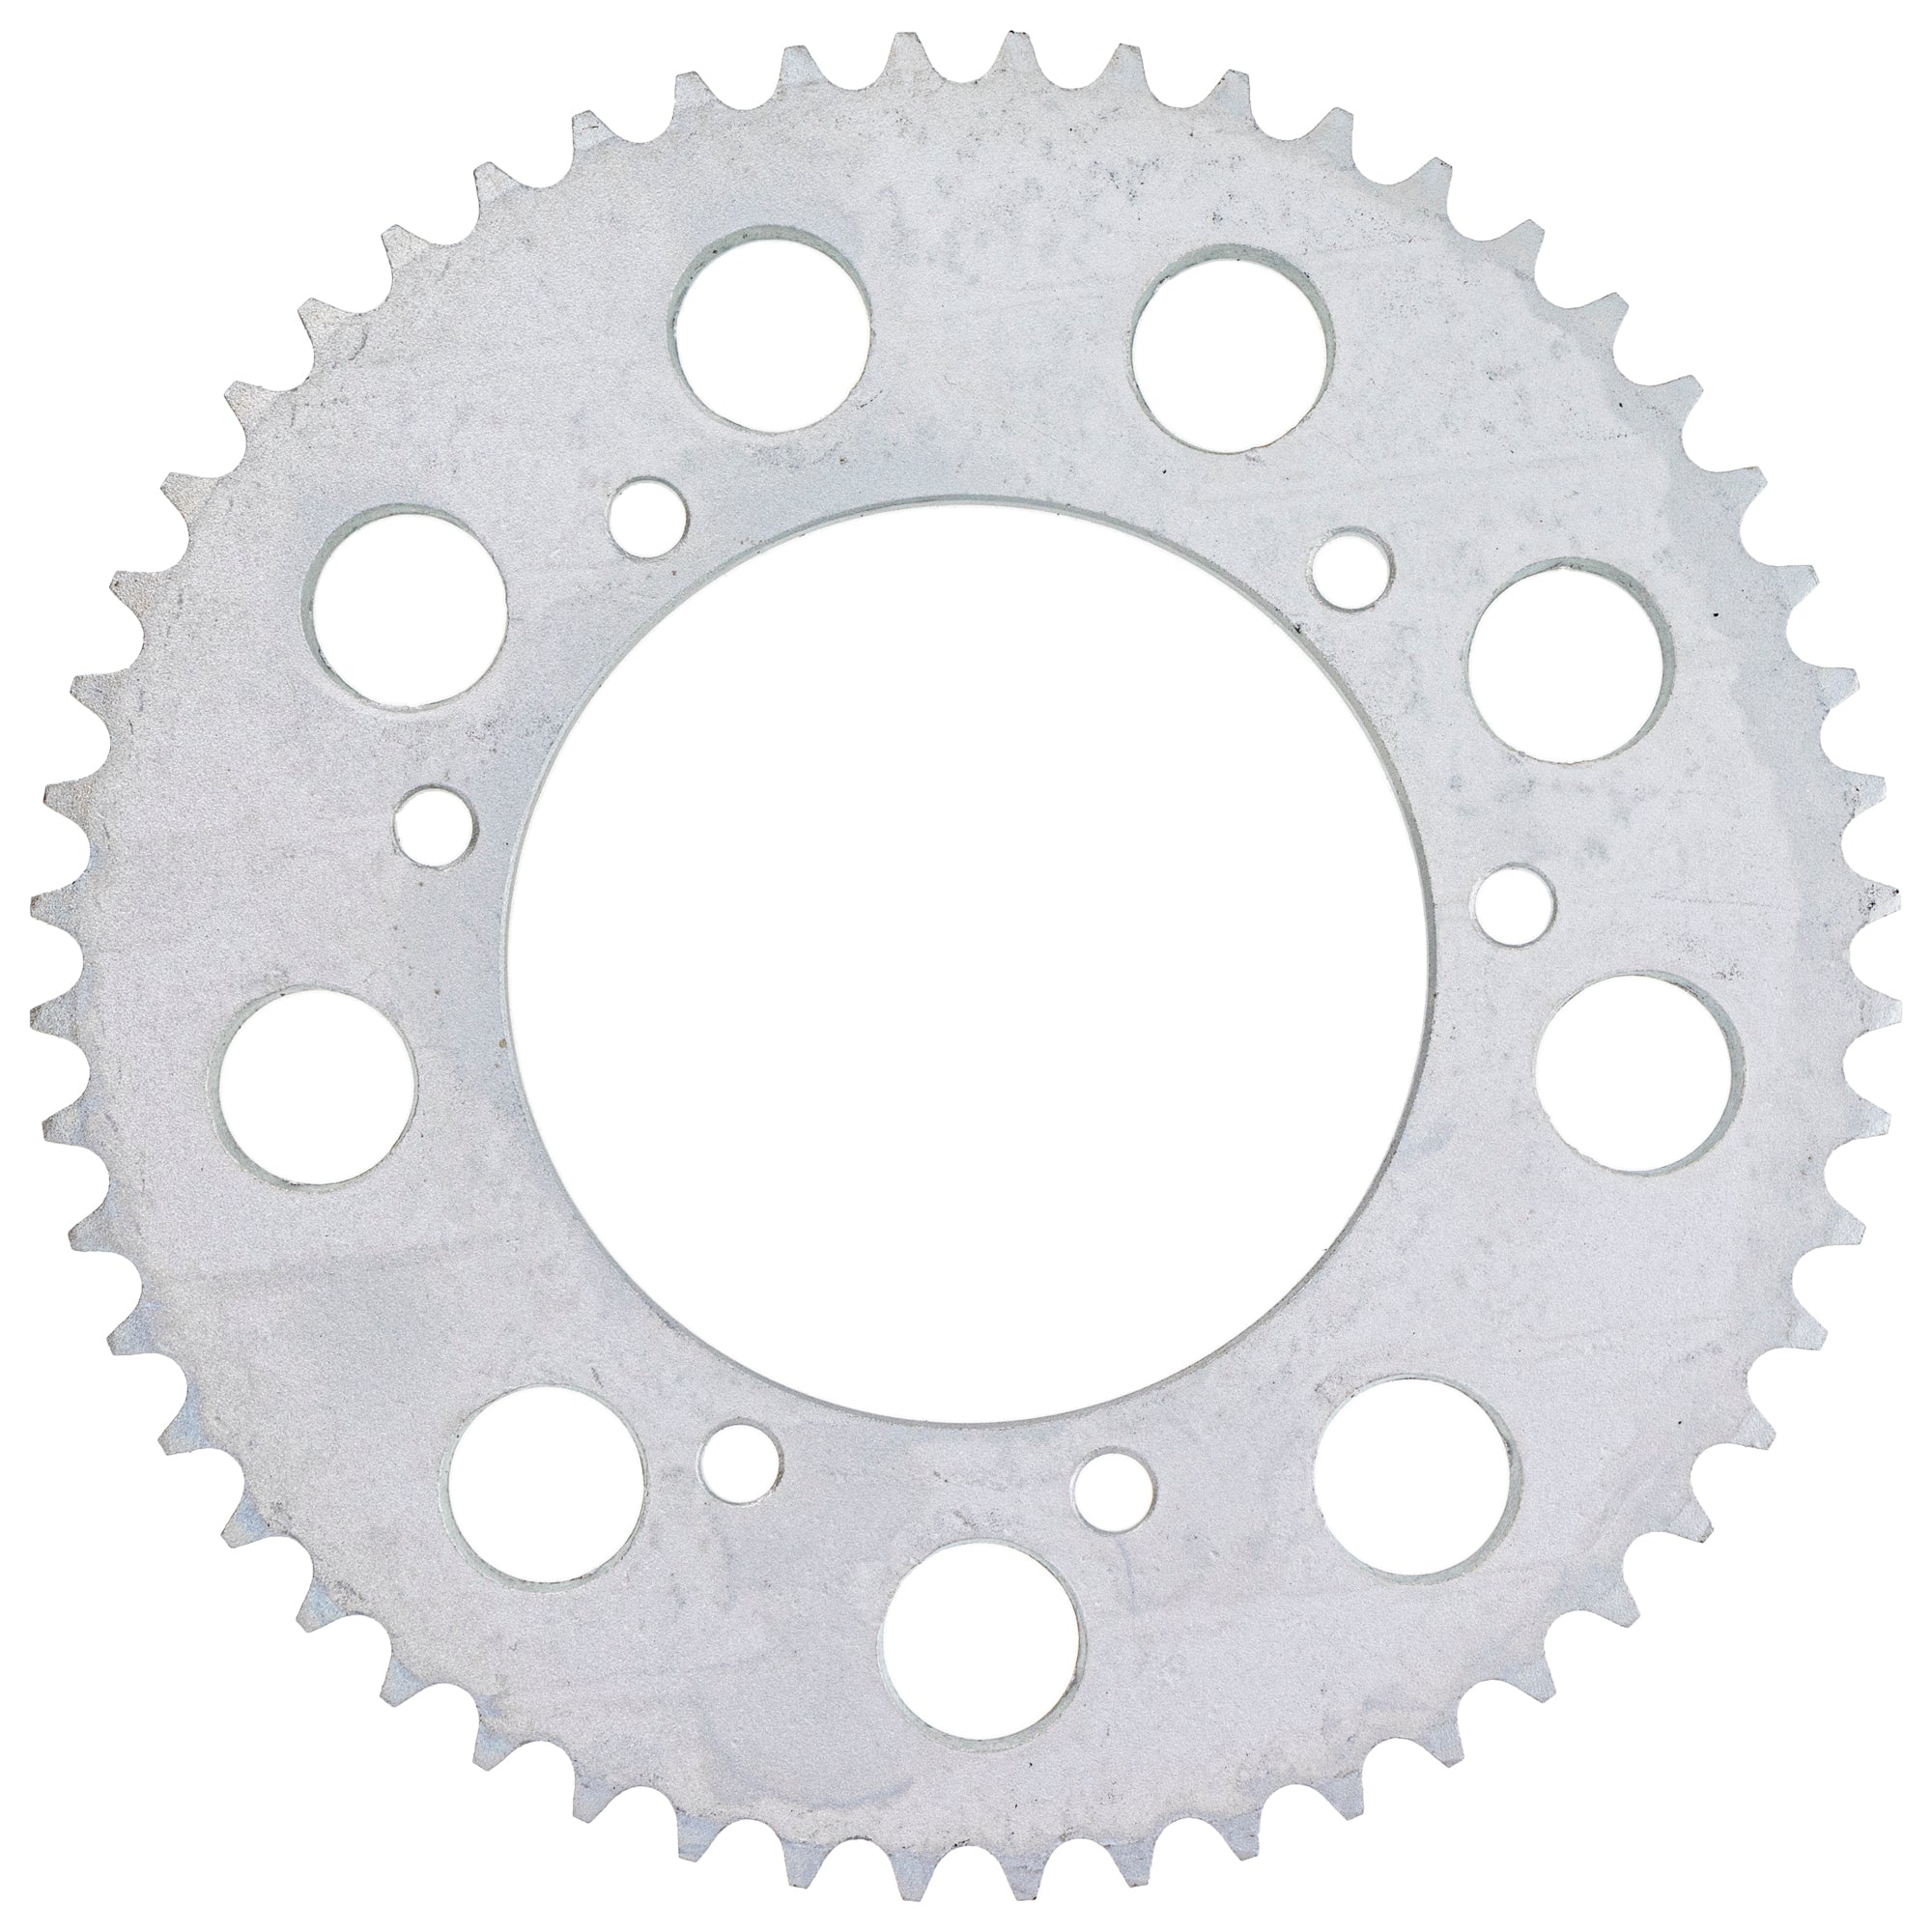 420 Front 12T Rear 52T Tooth Drive Sprocket Kit for Peugeot XR6 50